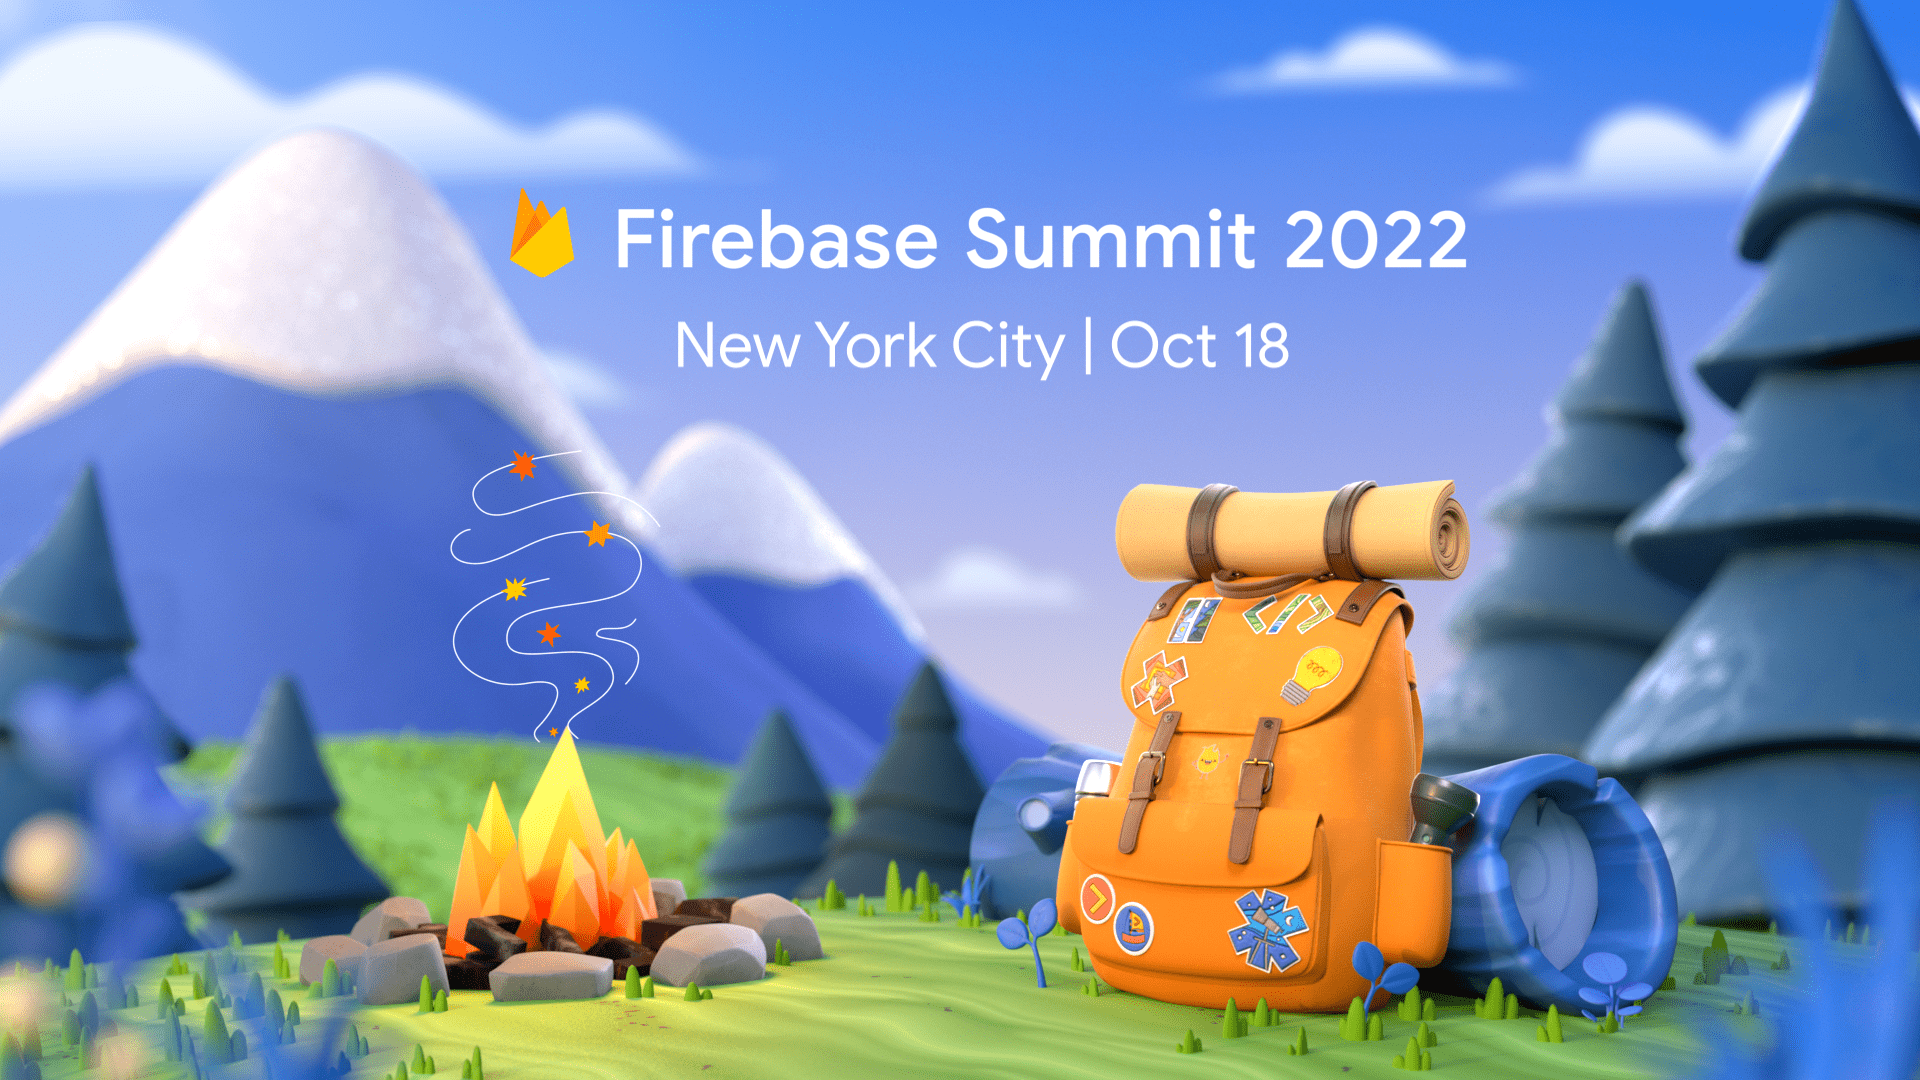 What's new at Firebase Summit 2022